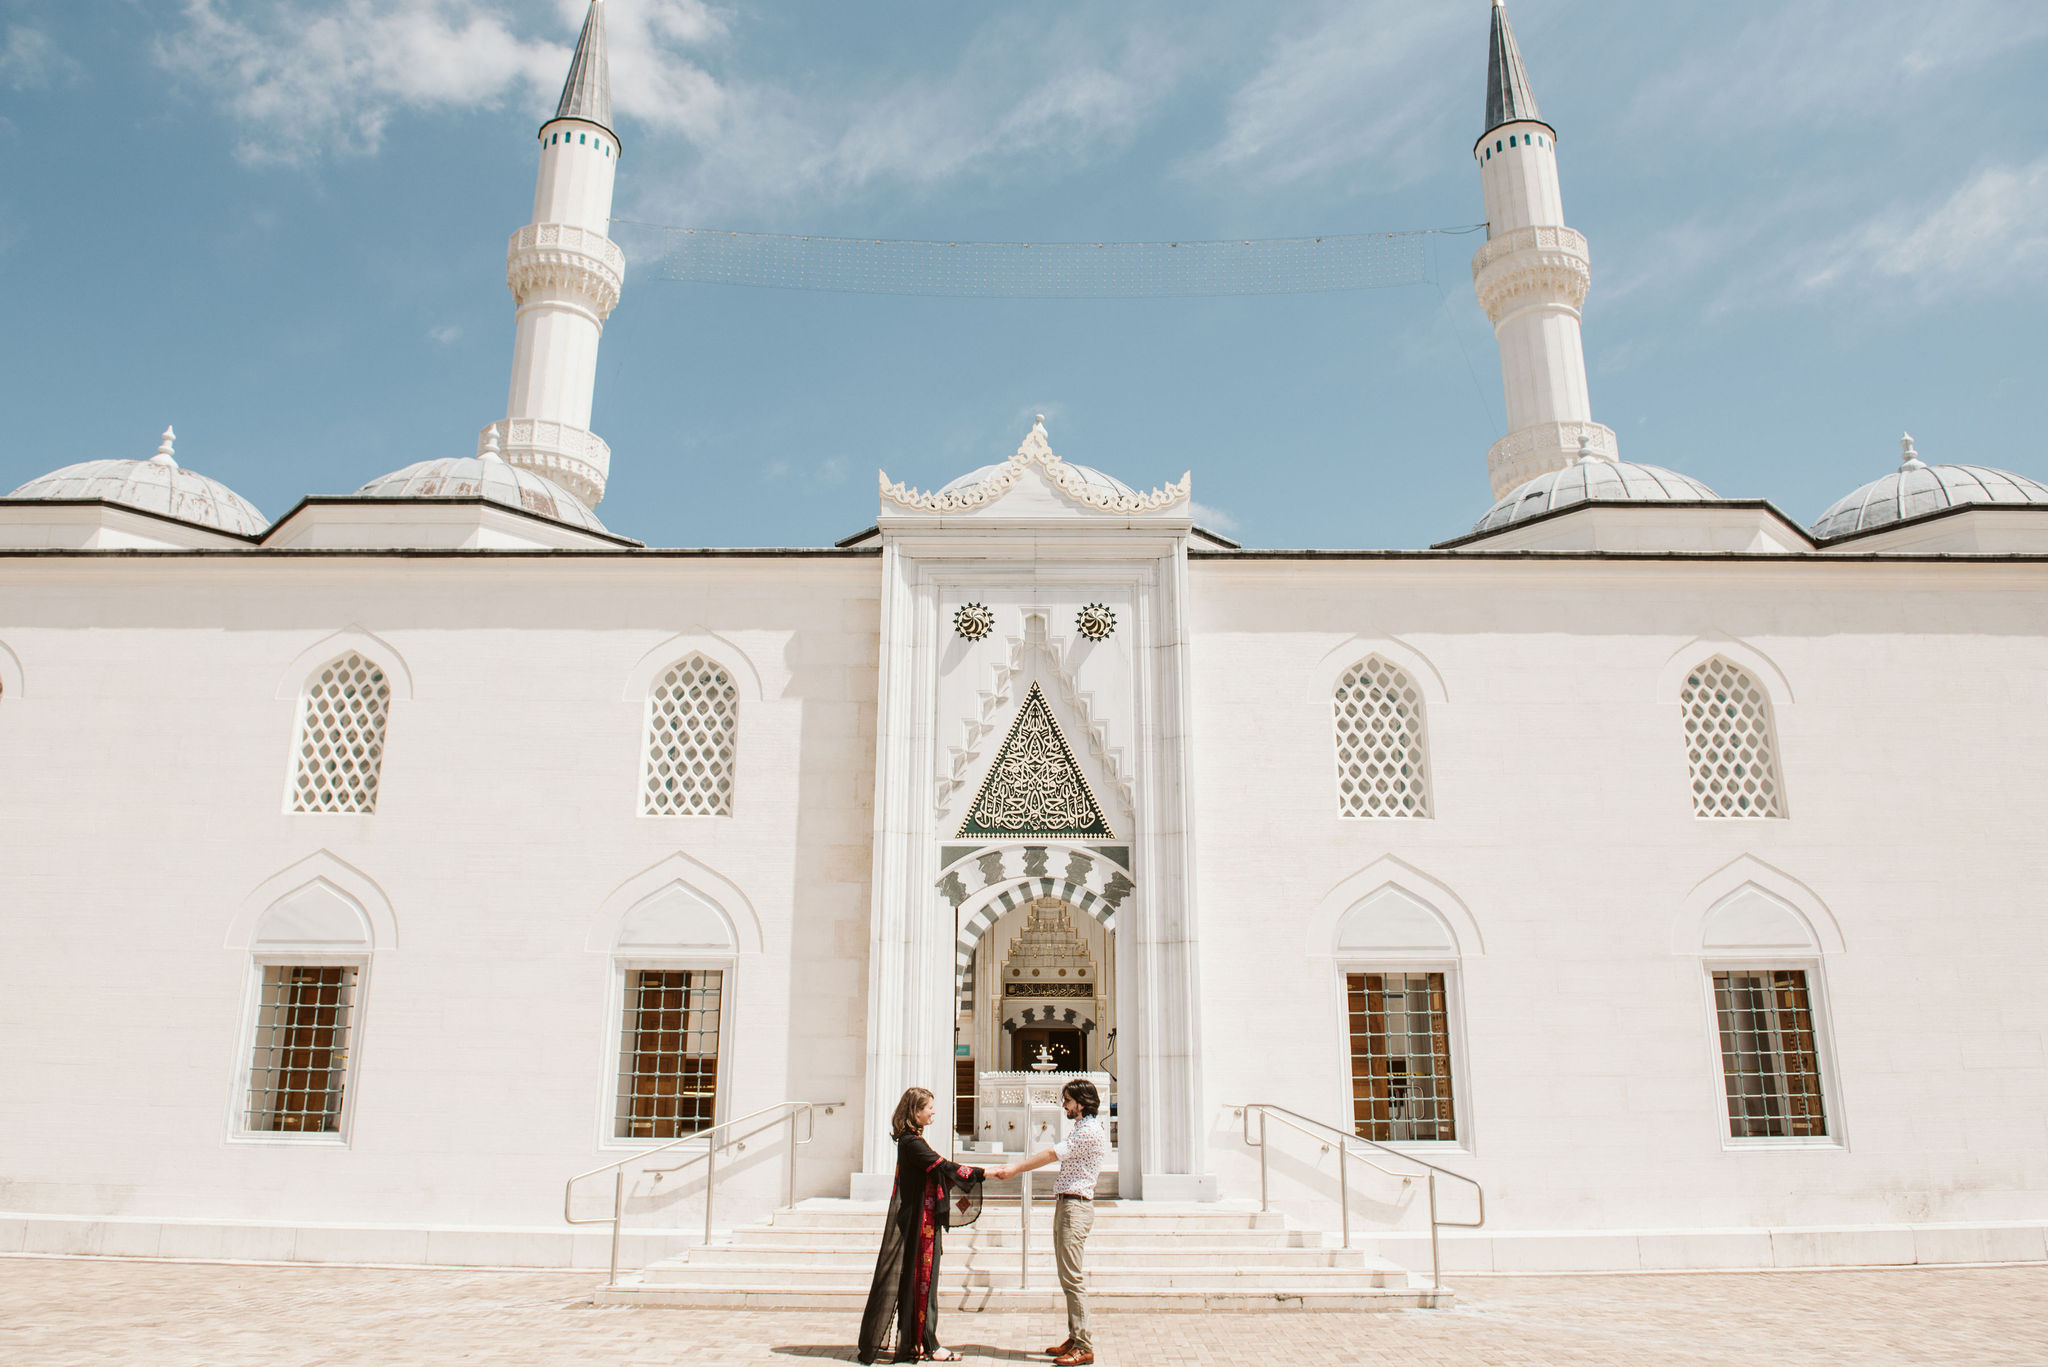    Washington DC, Baltimore Wedding Photographer, Diyanet Center of America, Spring, Intimate Wedding, Traditional, Classic, Palestinian, Turkish Design, Couple Holds Hands Outside of Venue  